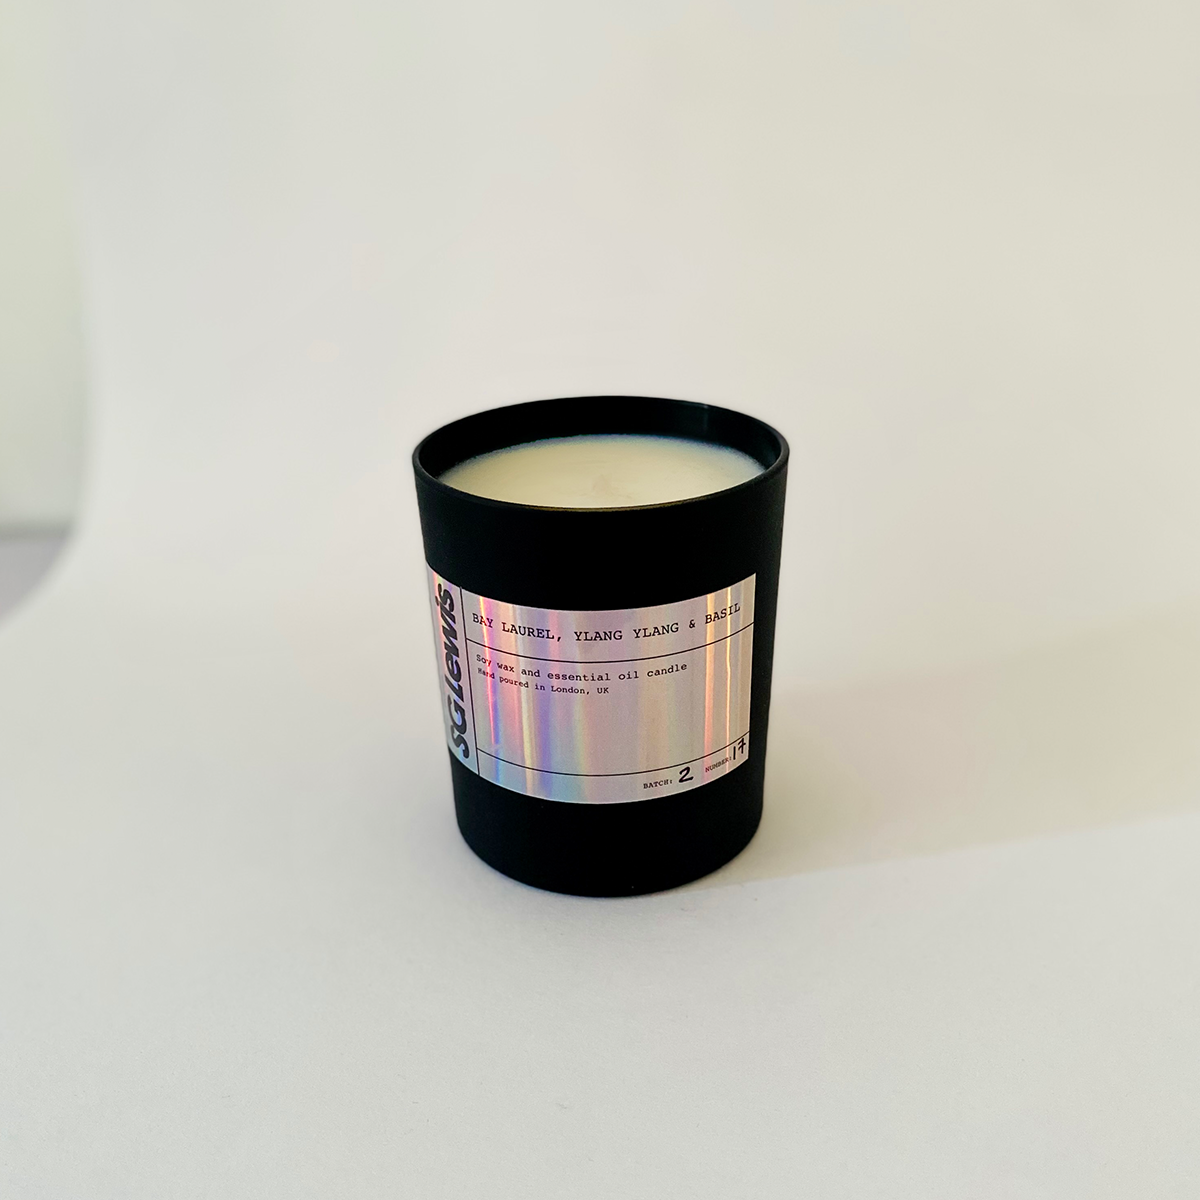 SG Lewis - ‘Fall’ Scented Candle